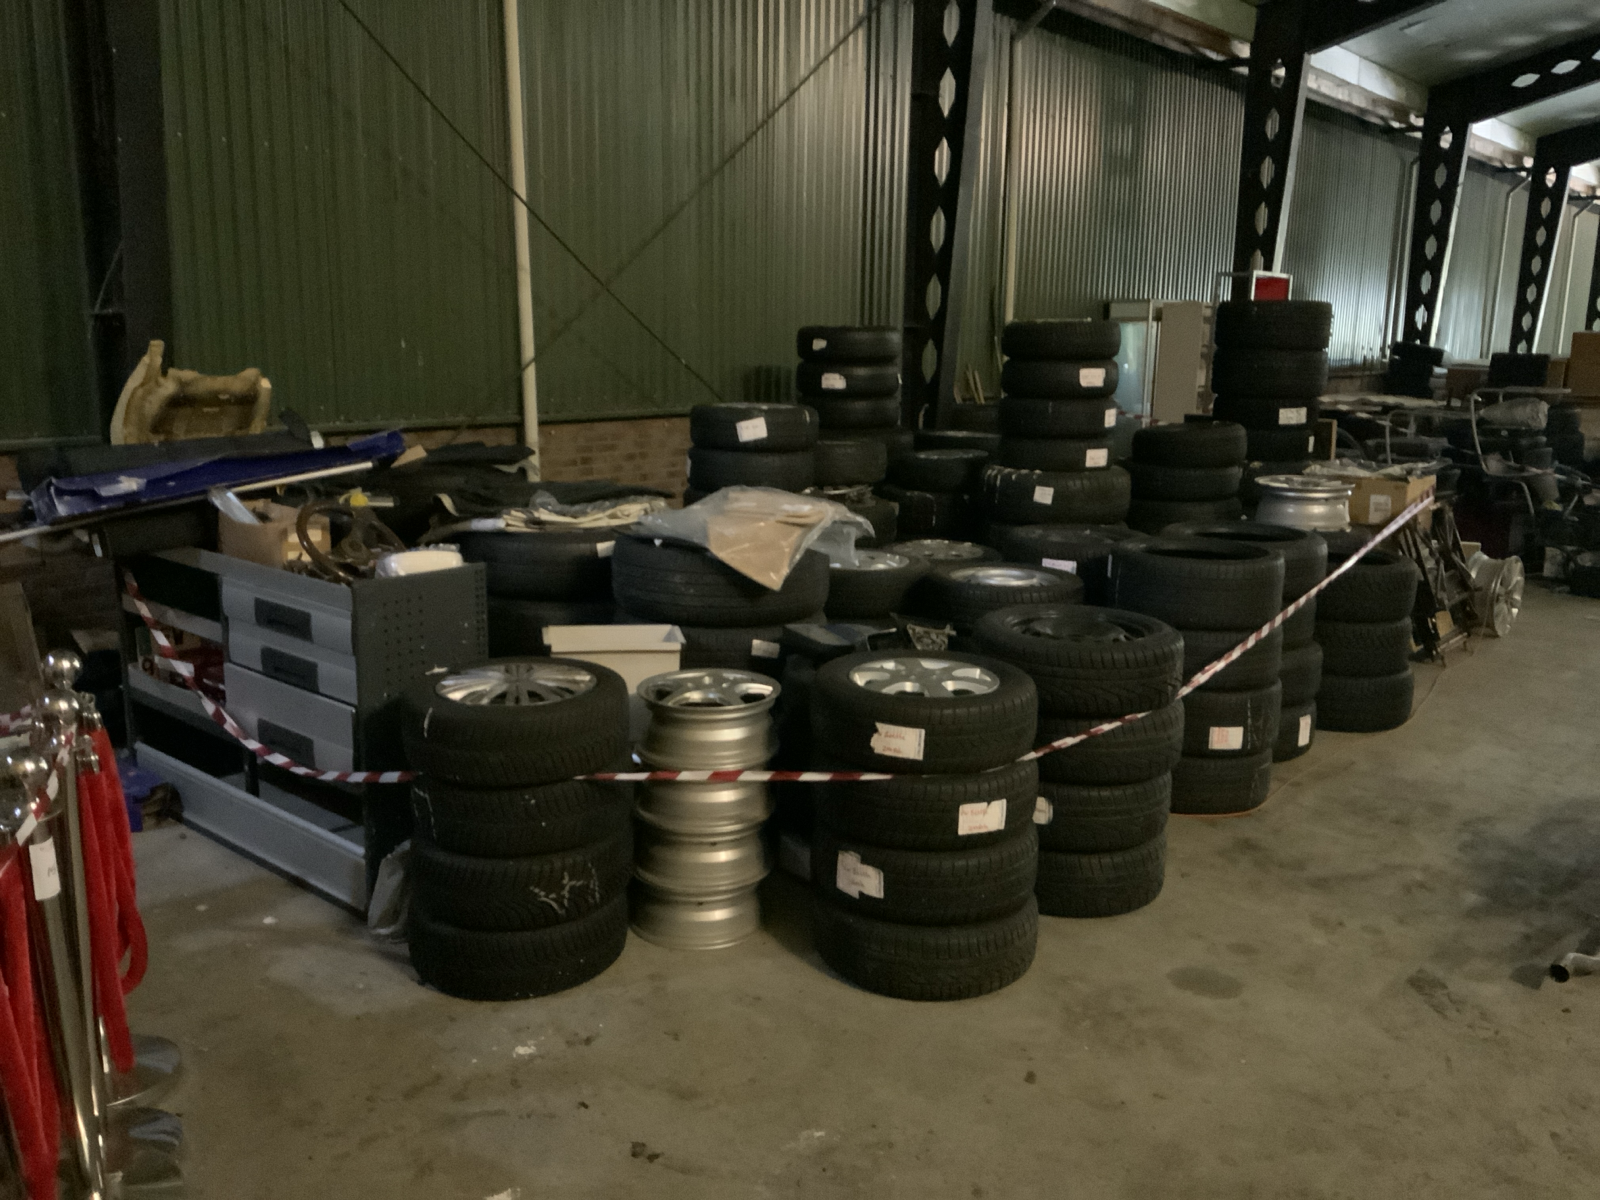 Batch of car parts and garage inventory